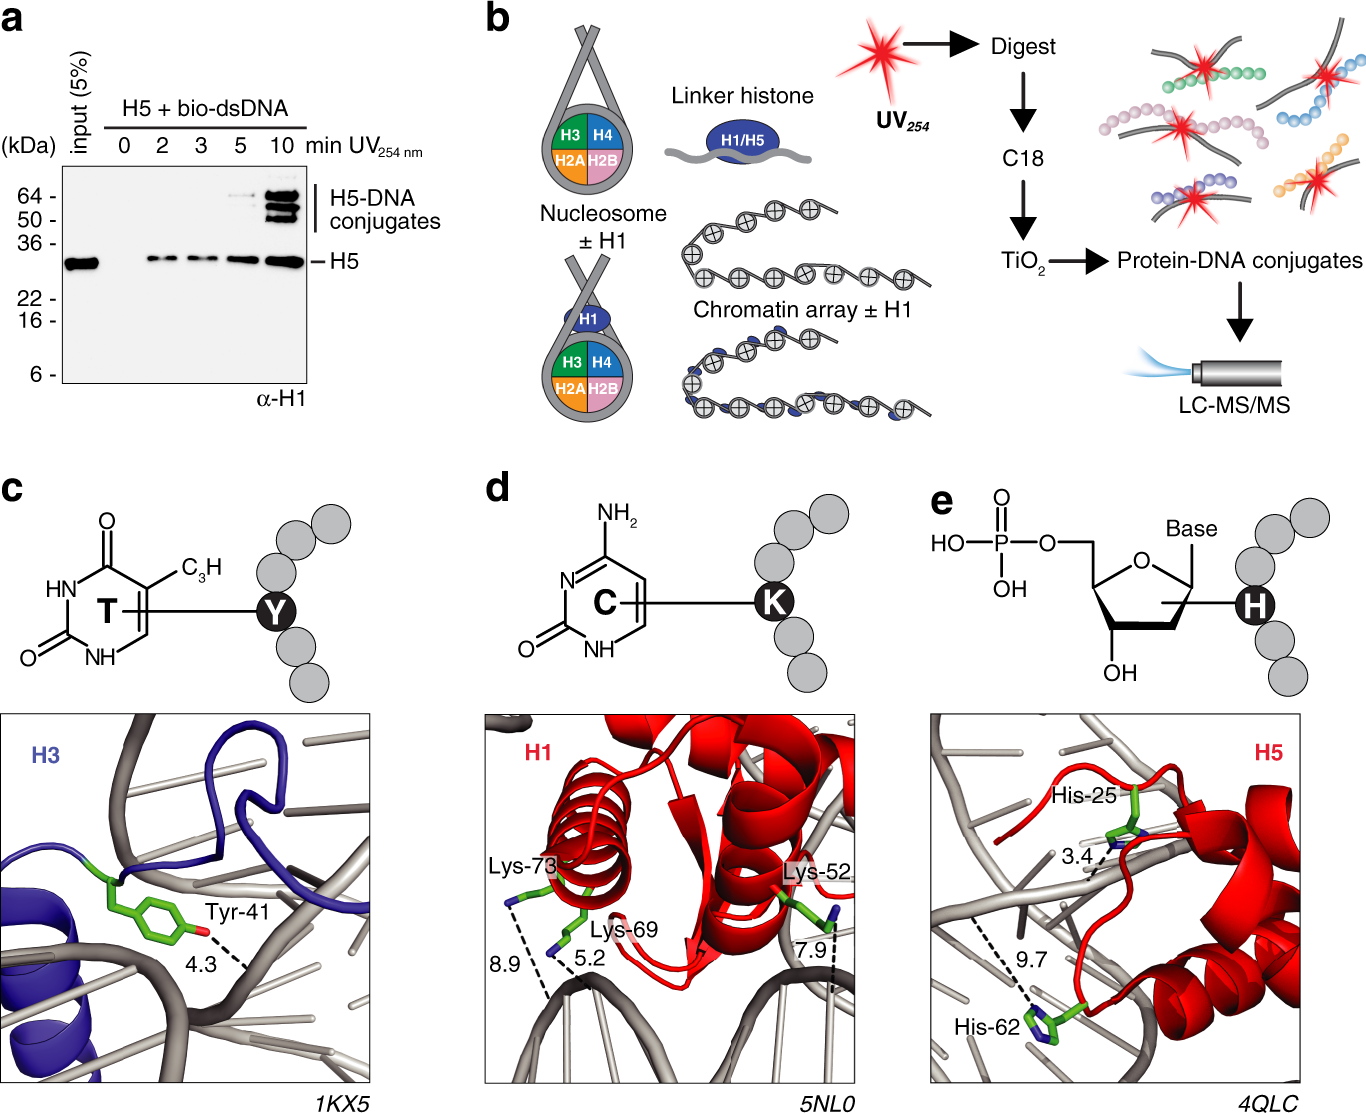 Analysis of protein-DNA interactions in chromatin by UV induced cross-linking and mass spectrometry | Nature Communications